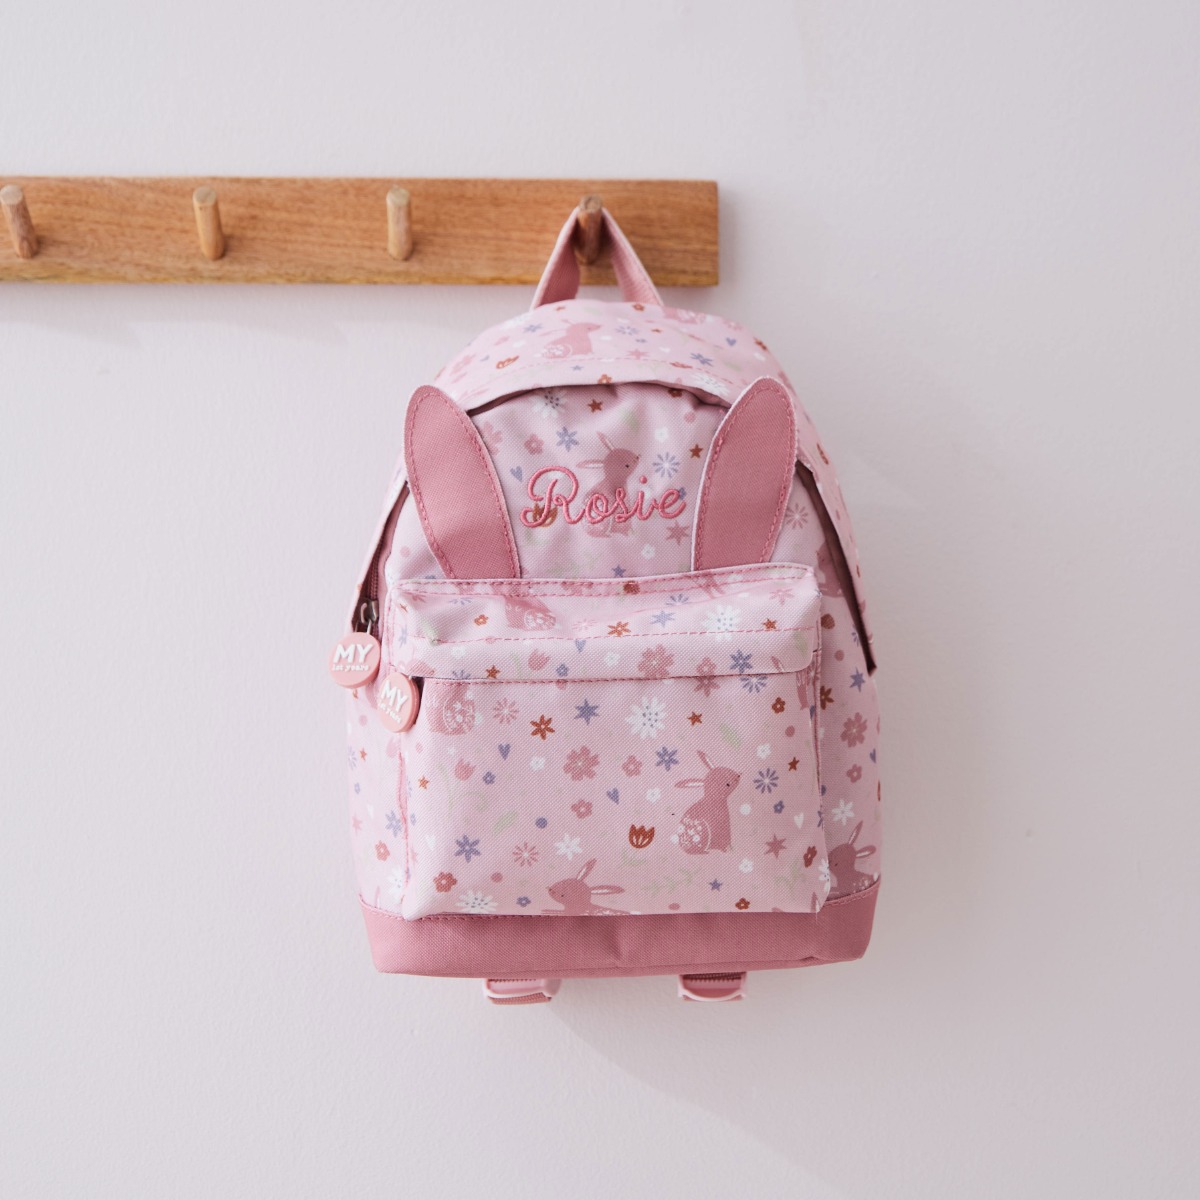 Personalised Pink Bunny Mini Backpack with Ears